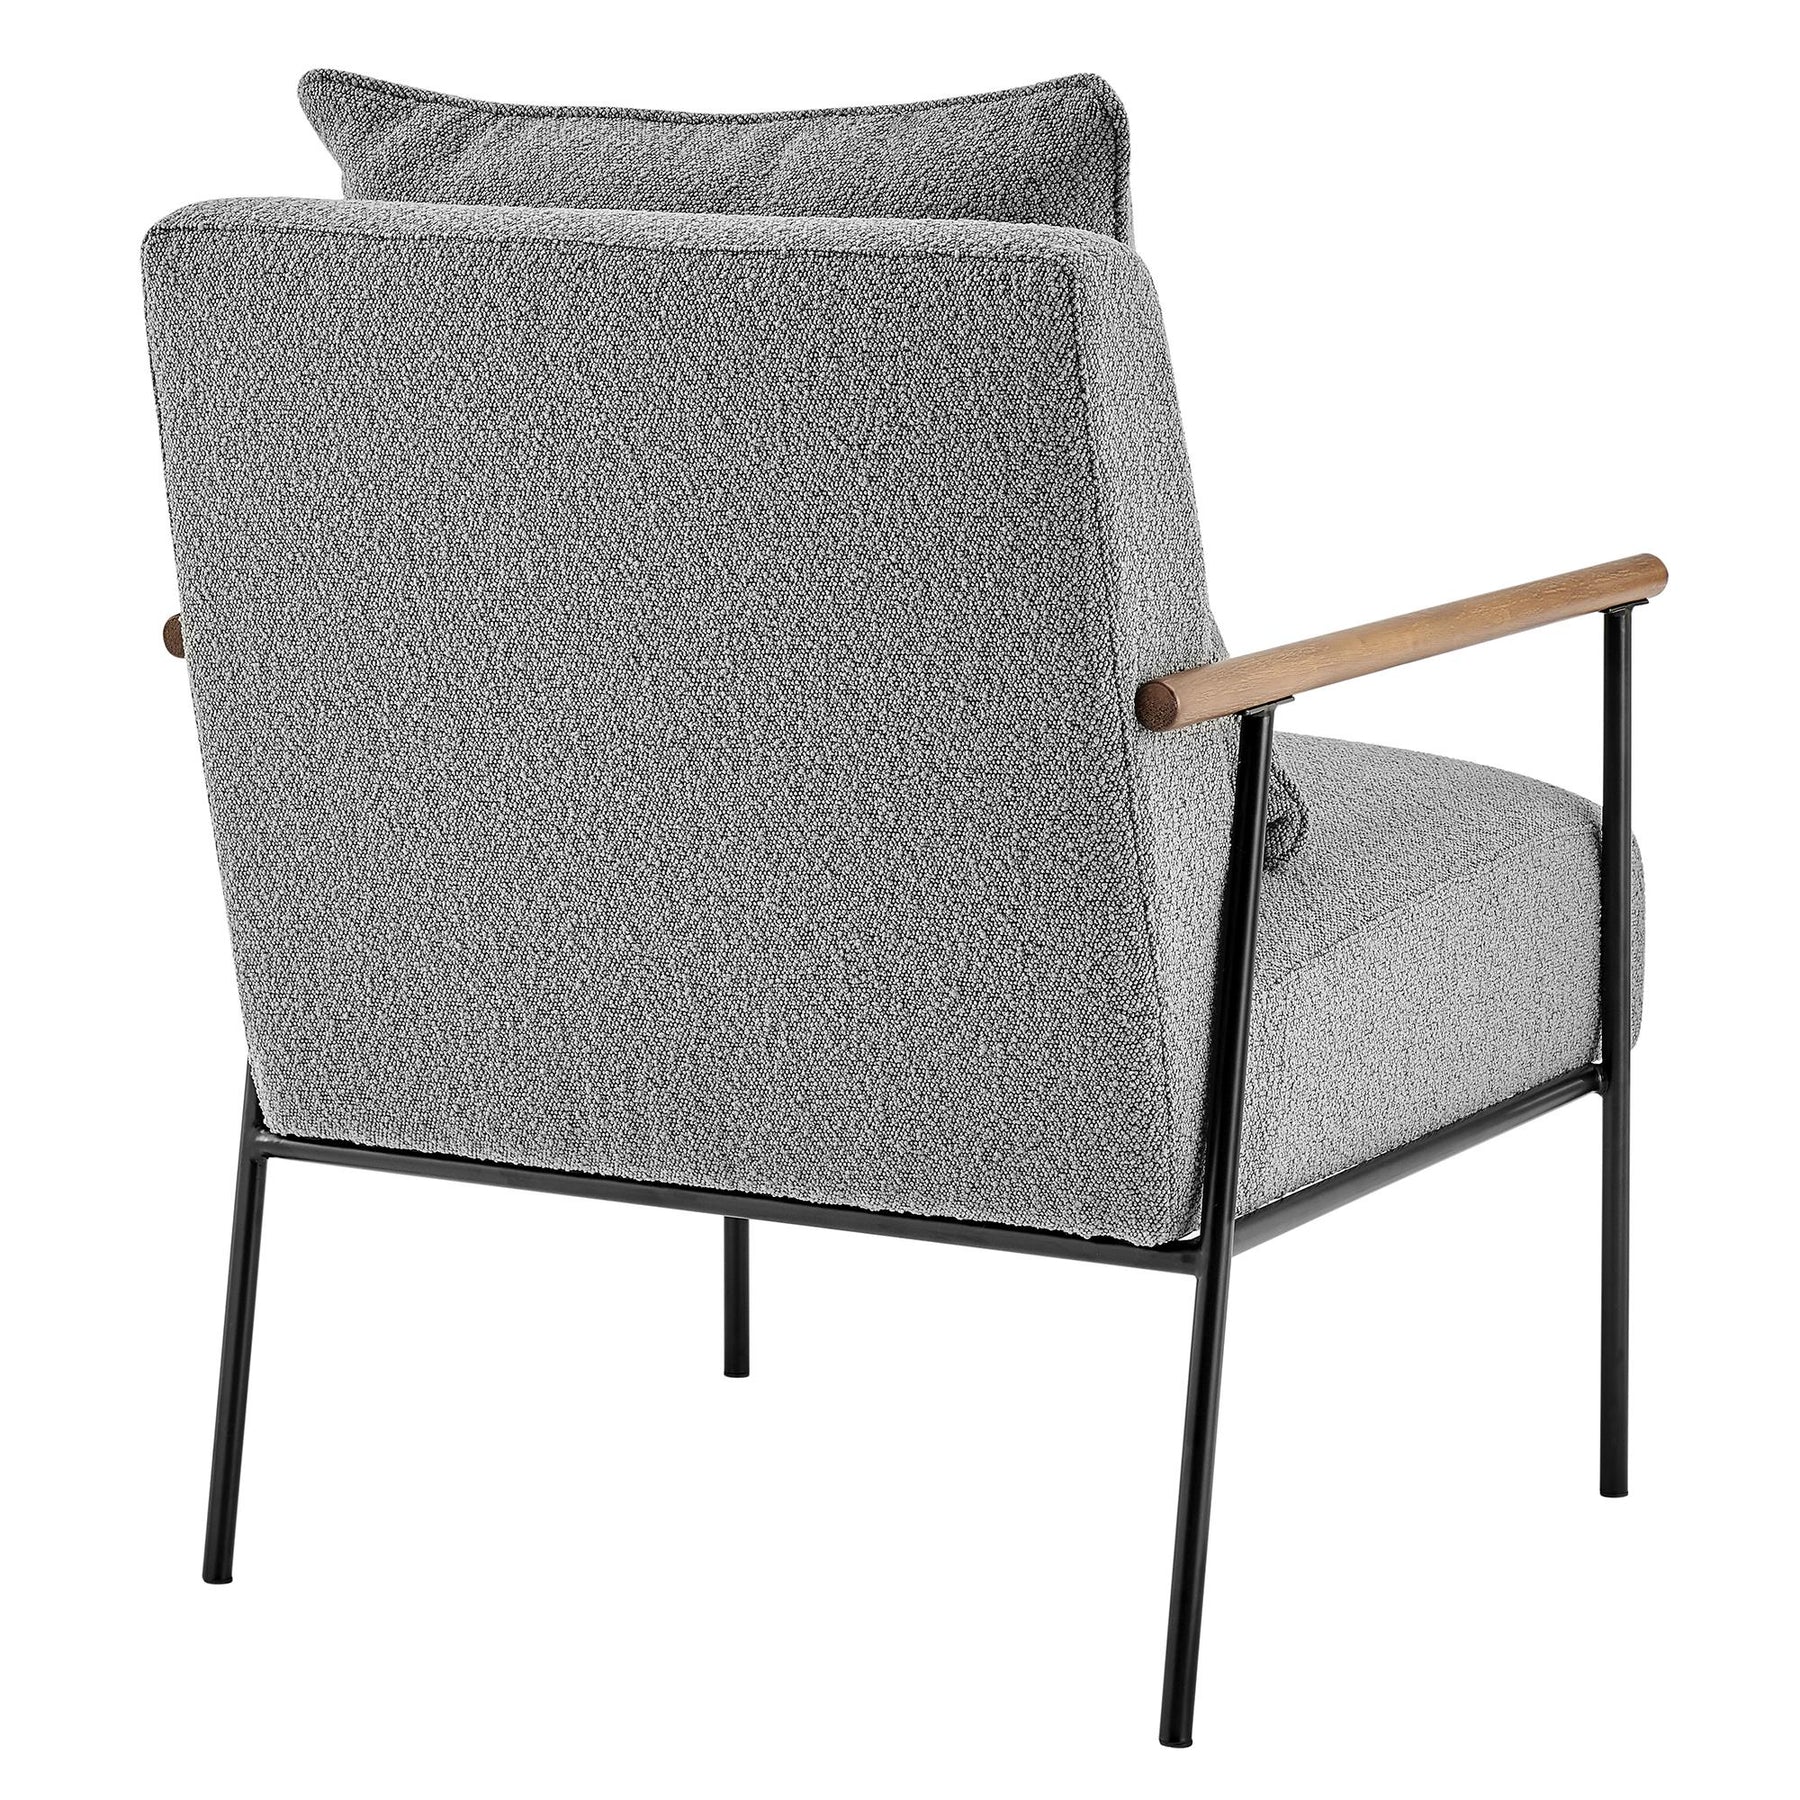 Quinton Fabric Accent Arm Chair by New Pacific Direct - 1250027